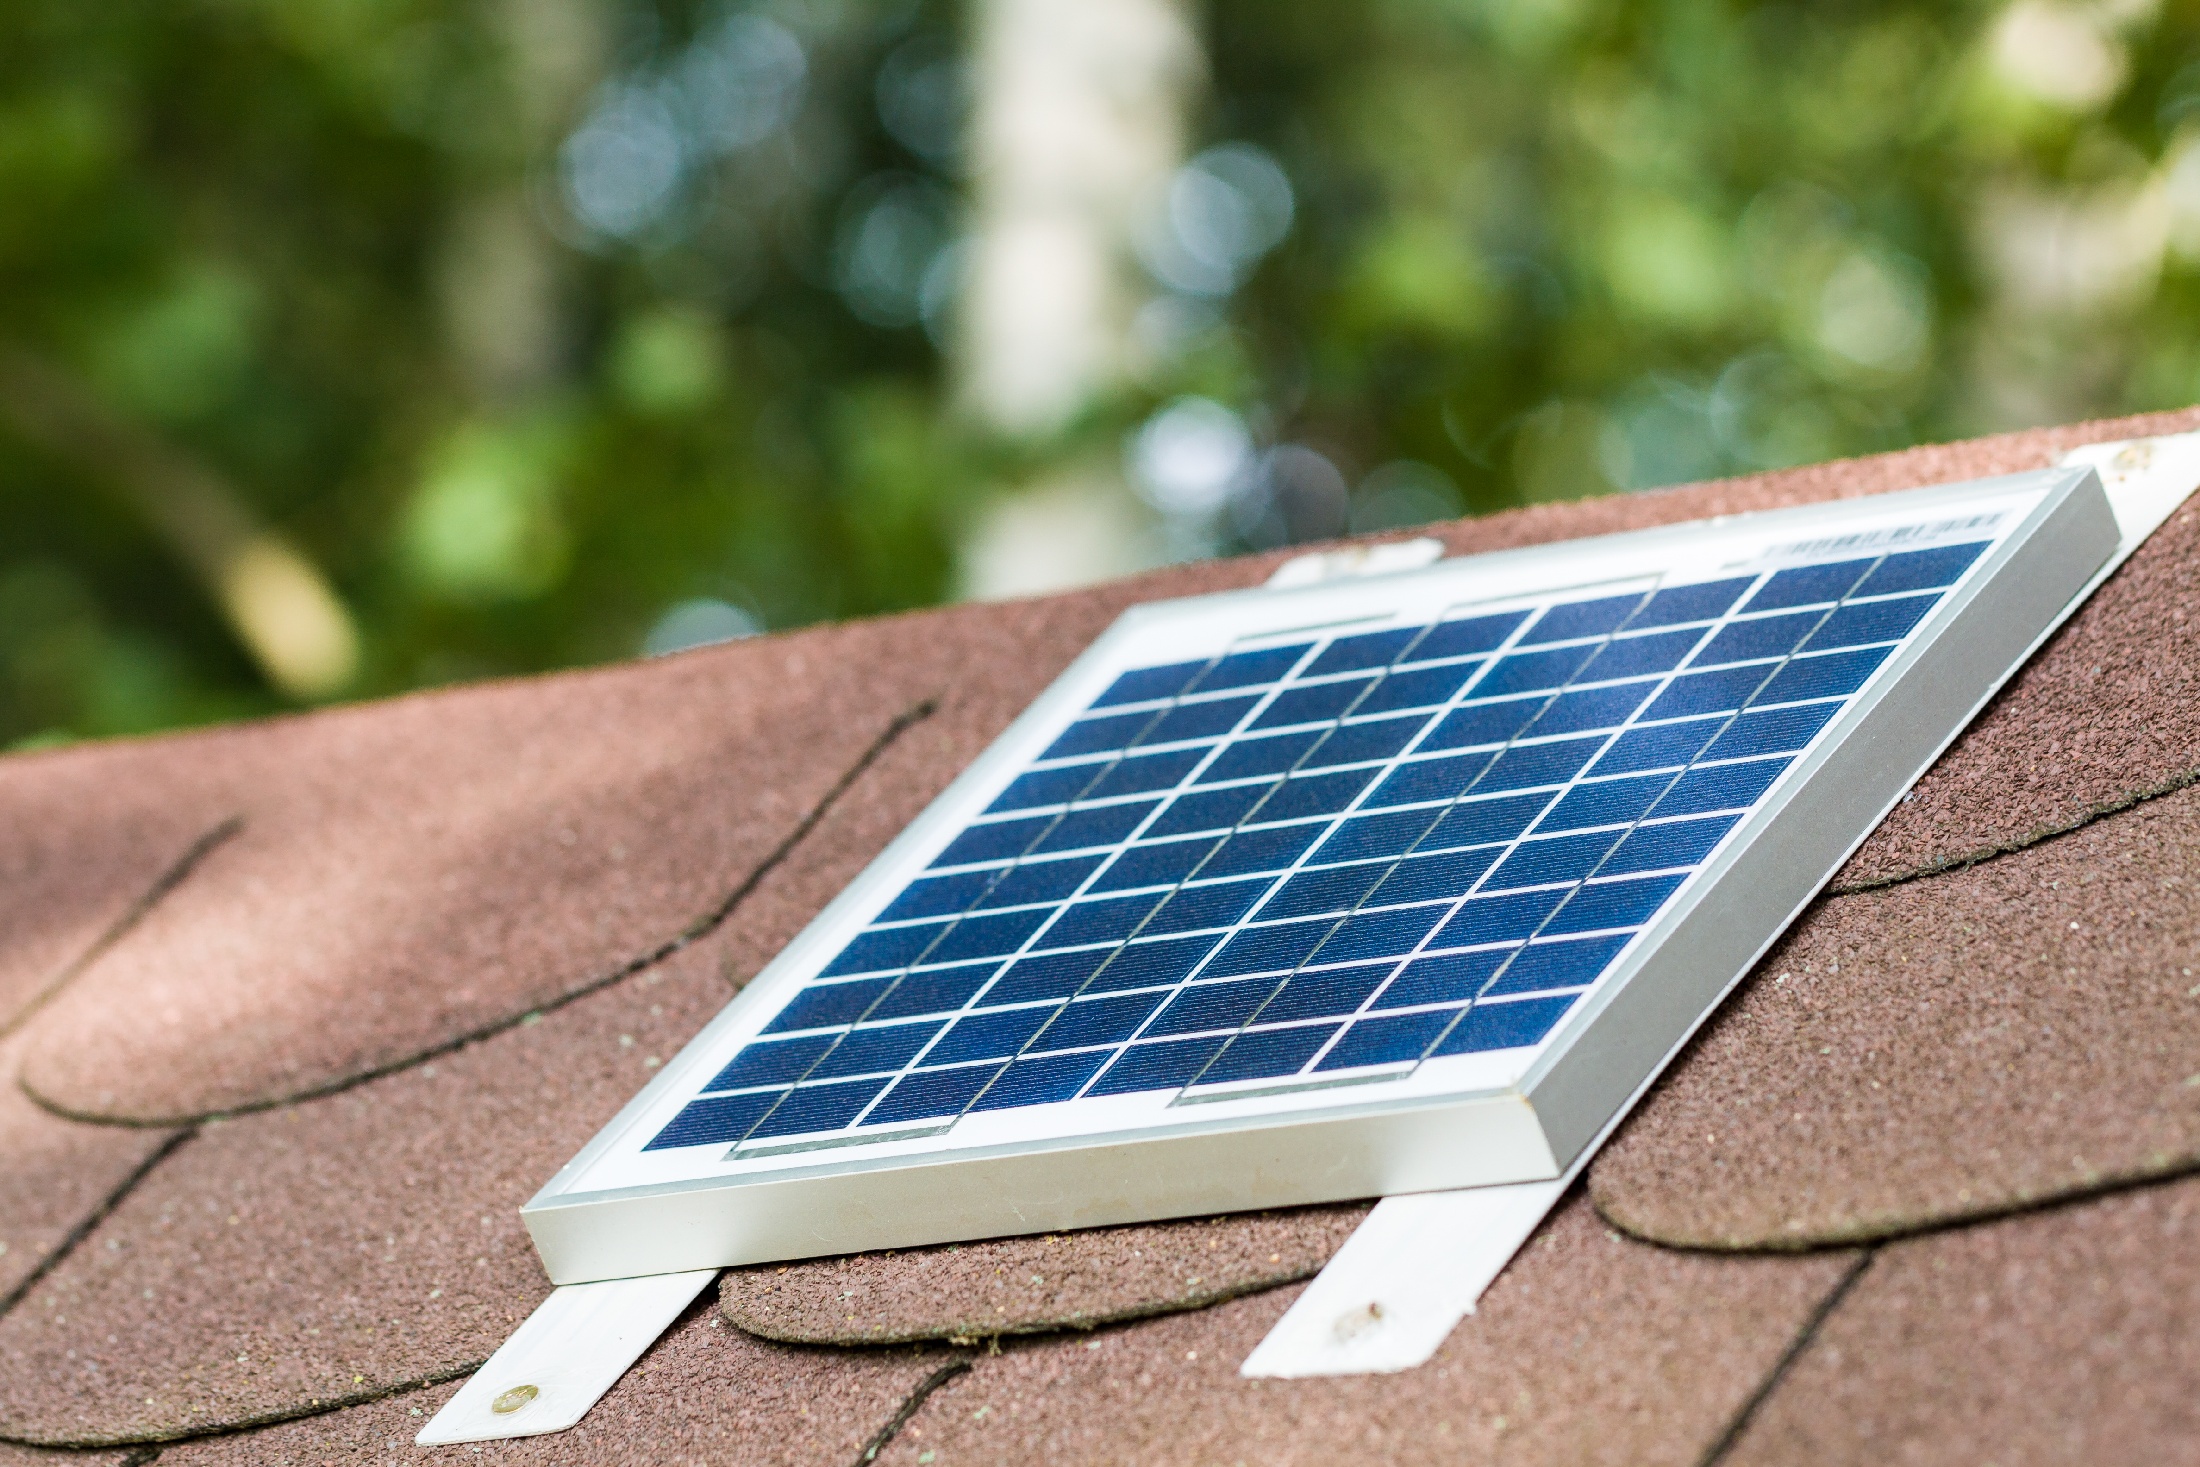 IV. Factors to Consider When Choosing a Portable Solar Power System